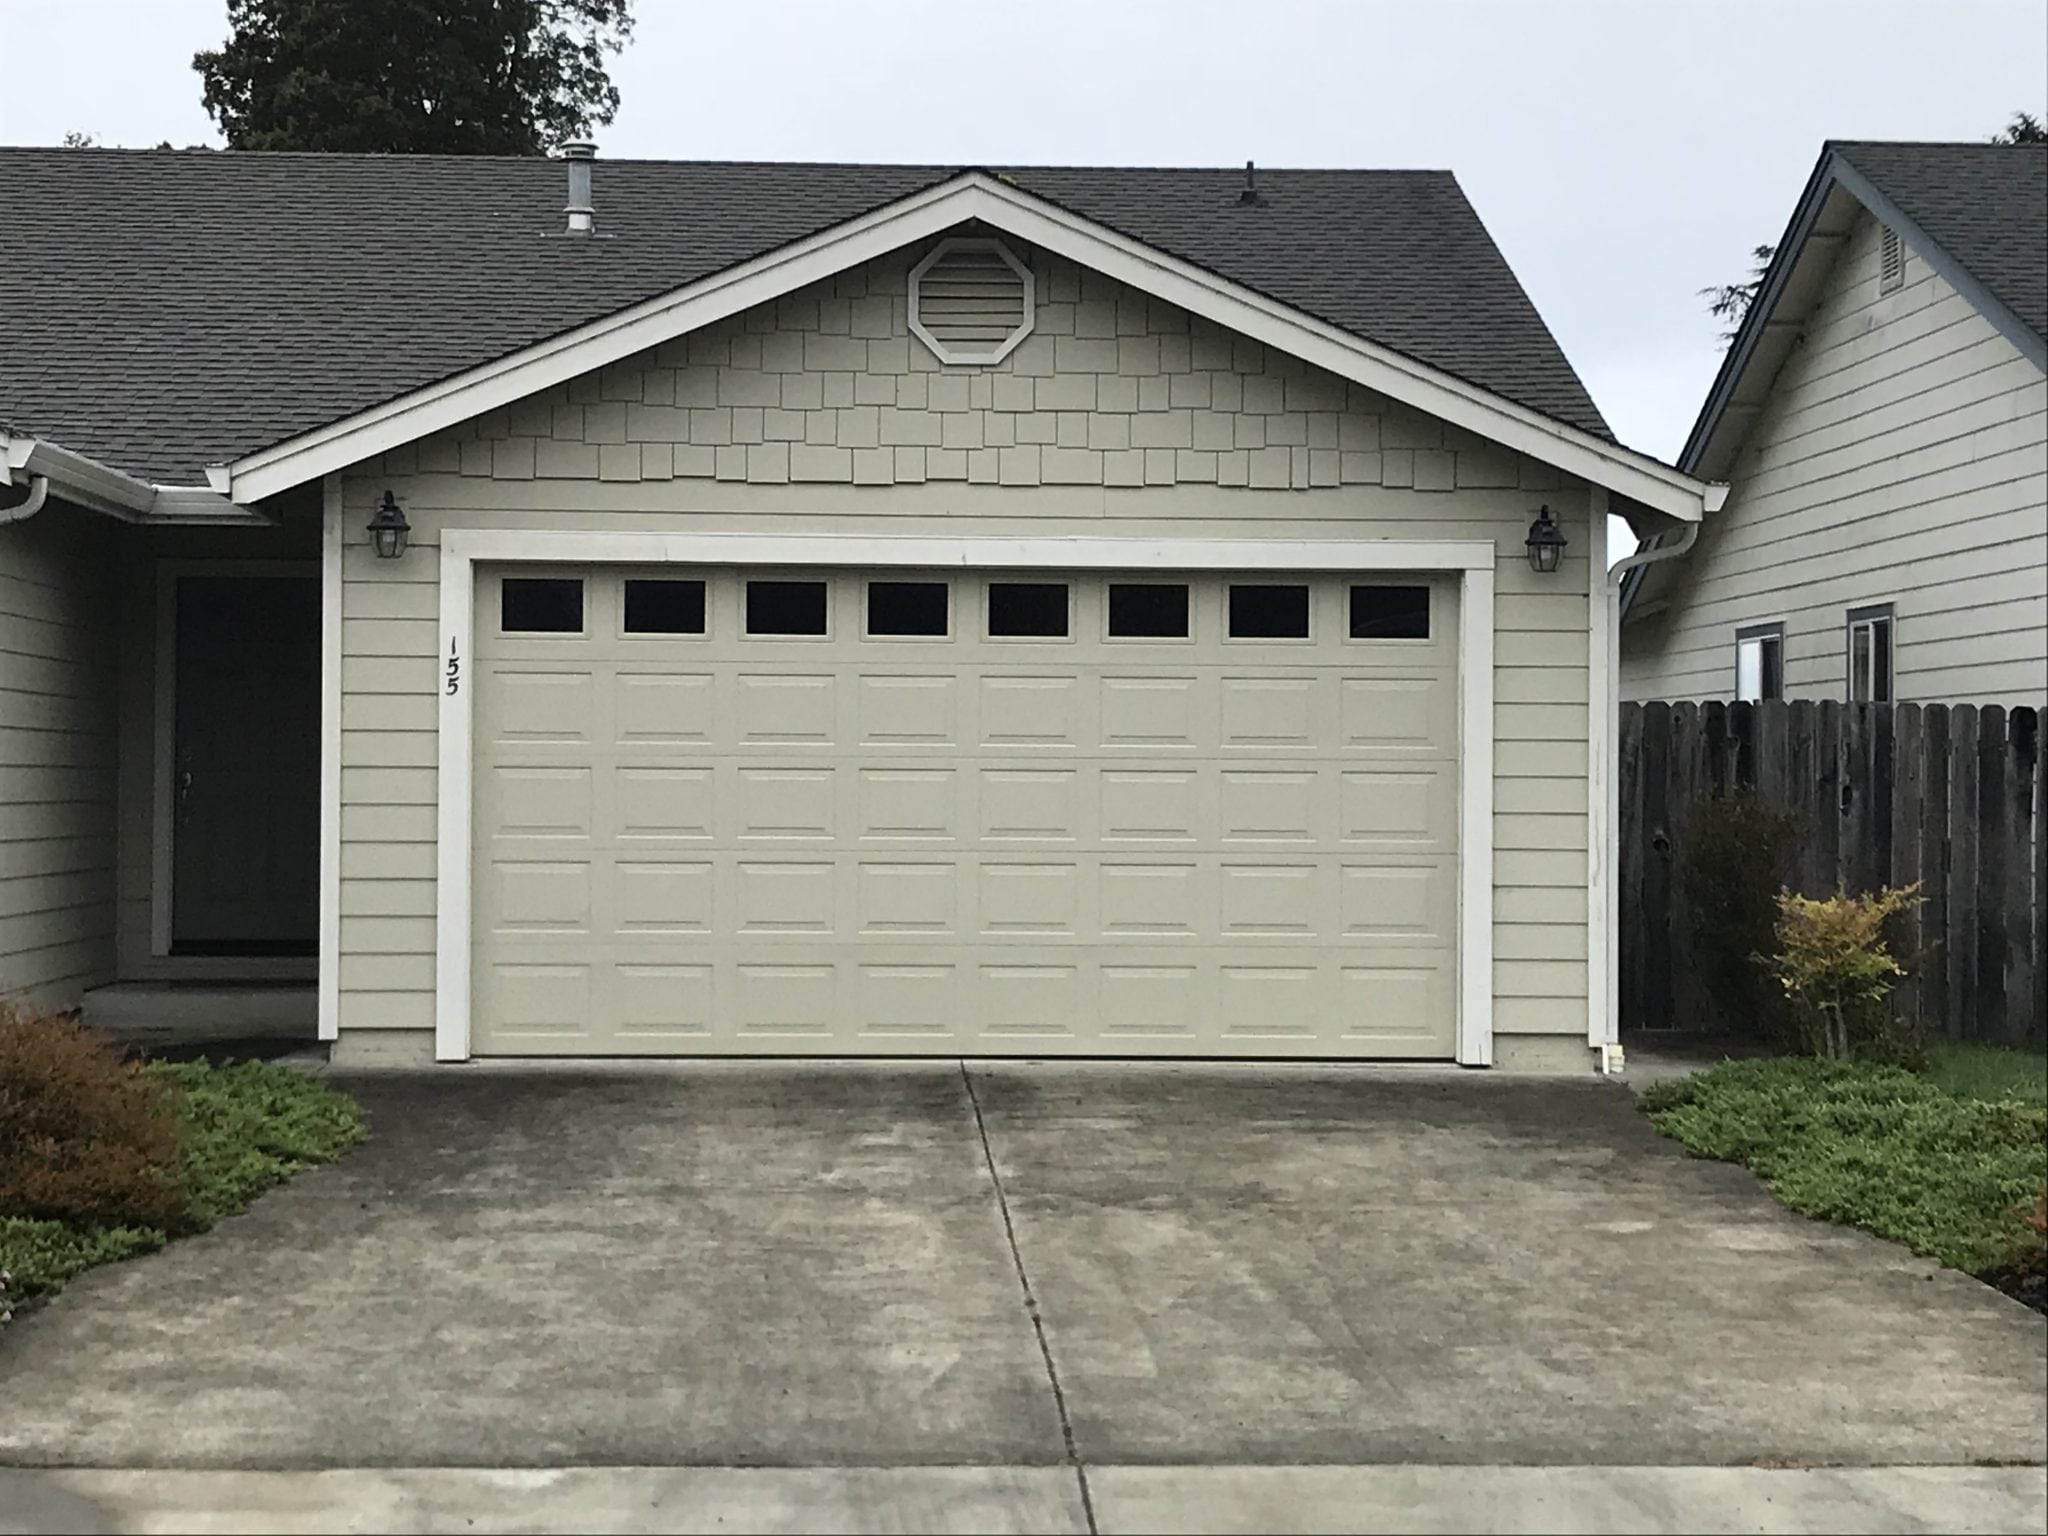 Instructions to avoid basic garage entryway issues throughout the winter